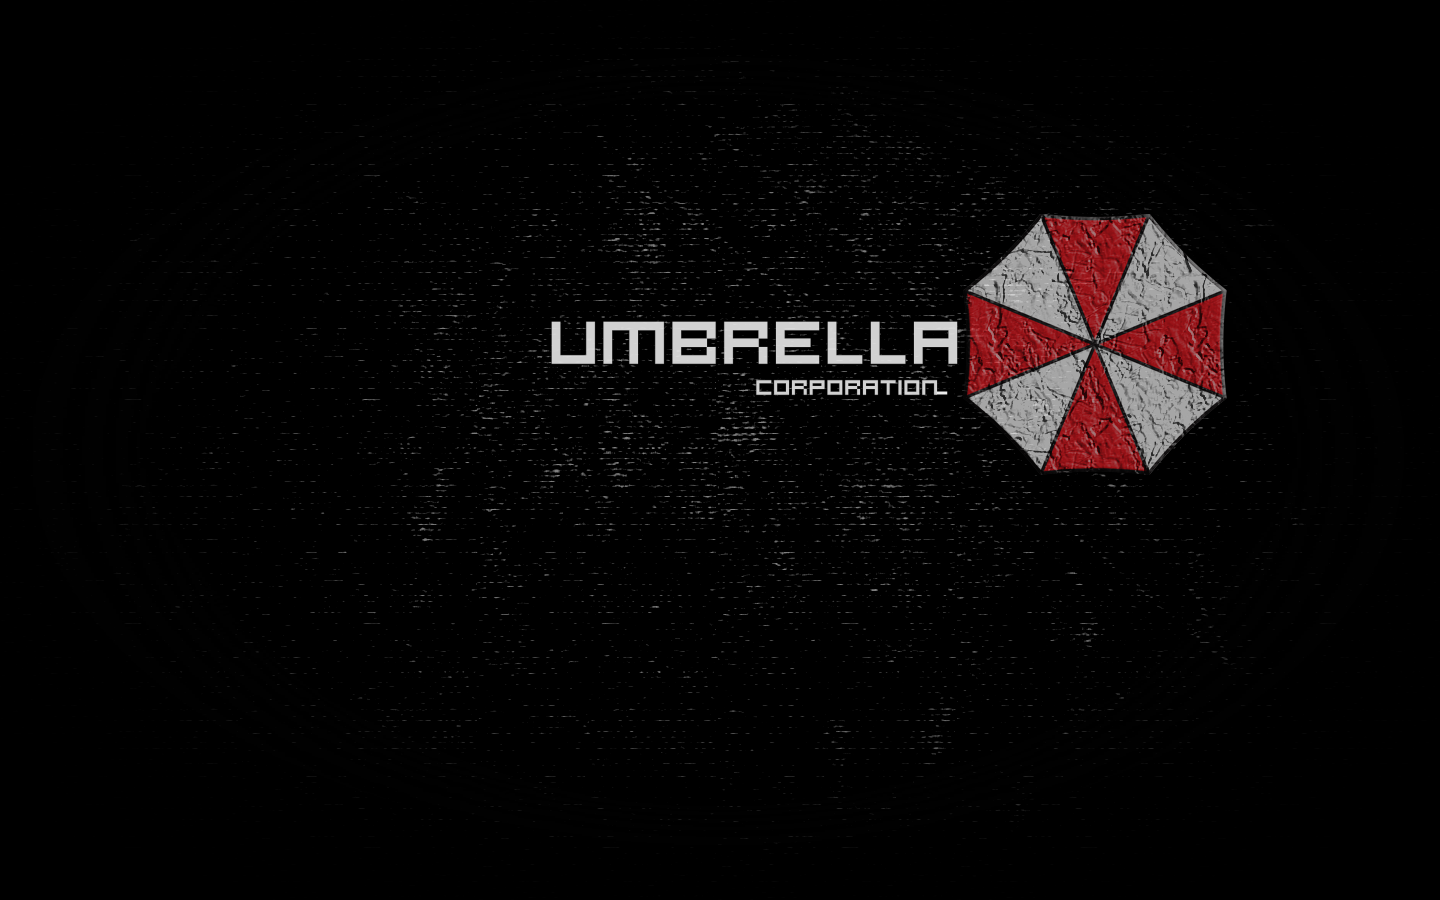 Gallery For gt Umbrella Corp Background